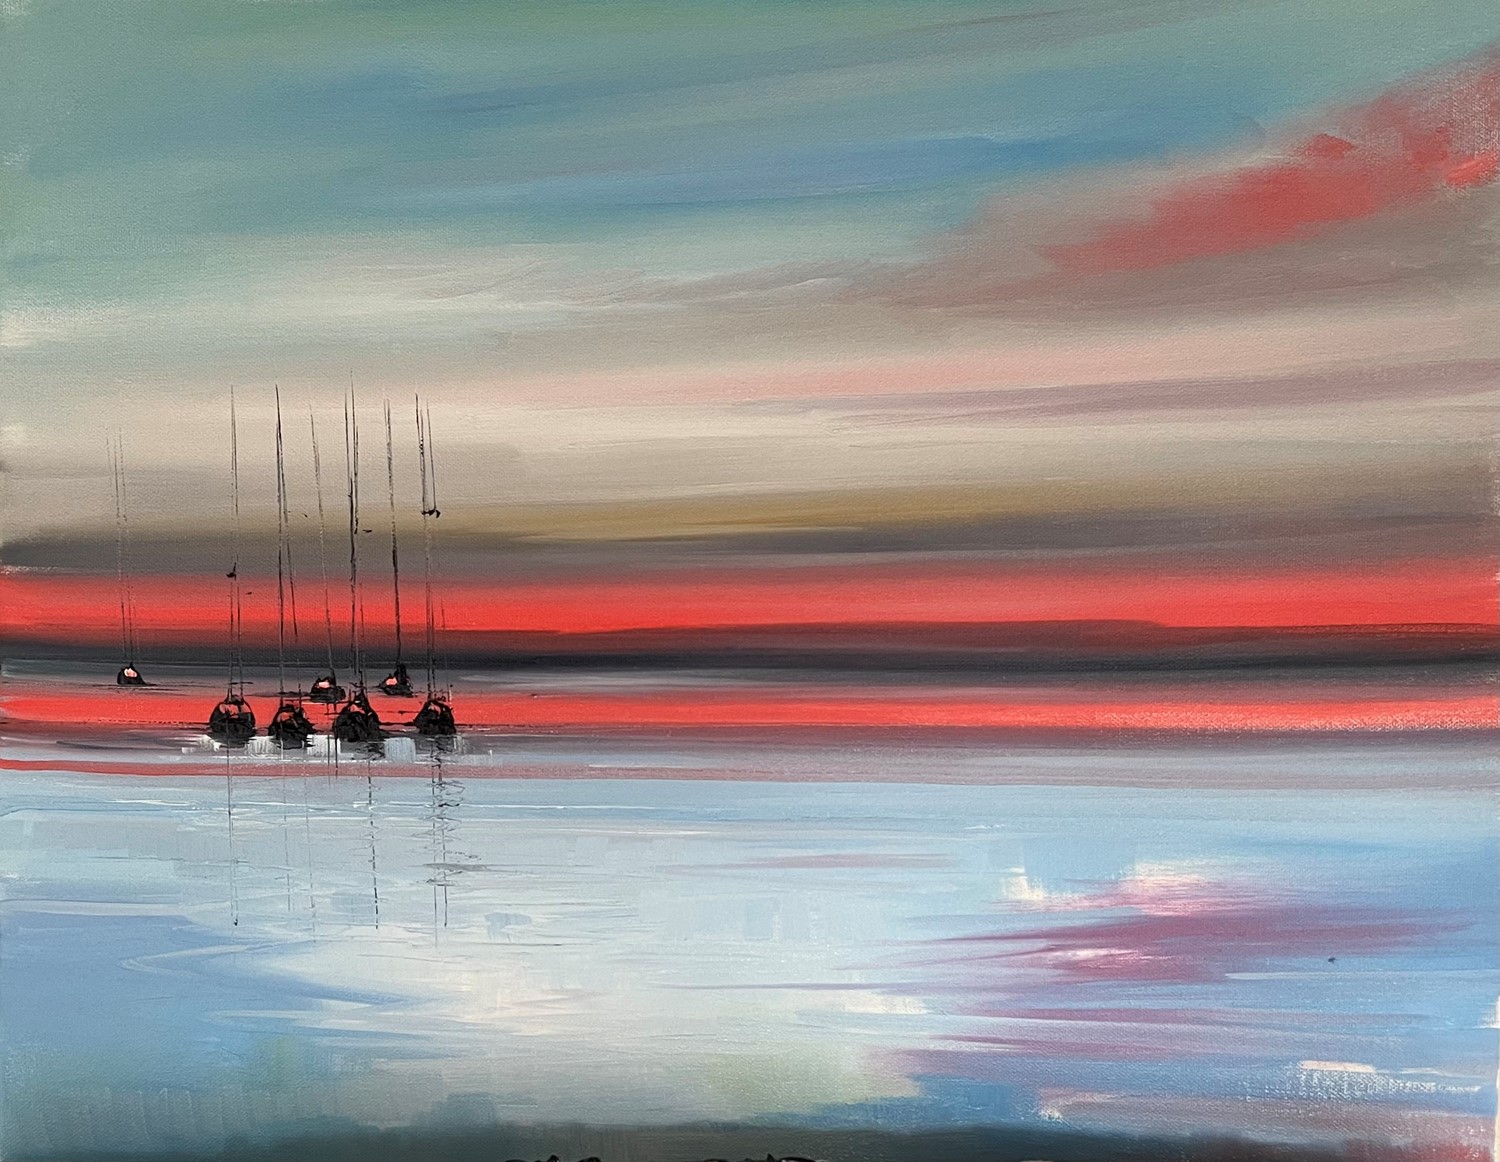 'Electric pink sky ' by artist Rosanne Barr